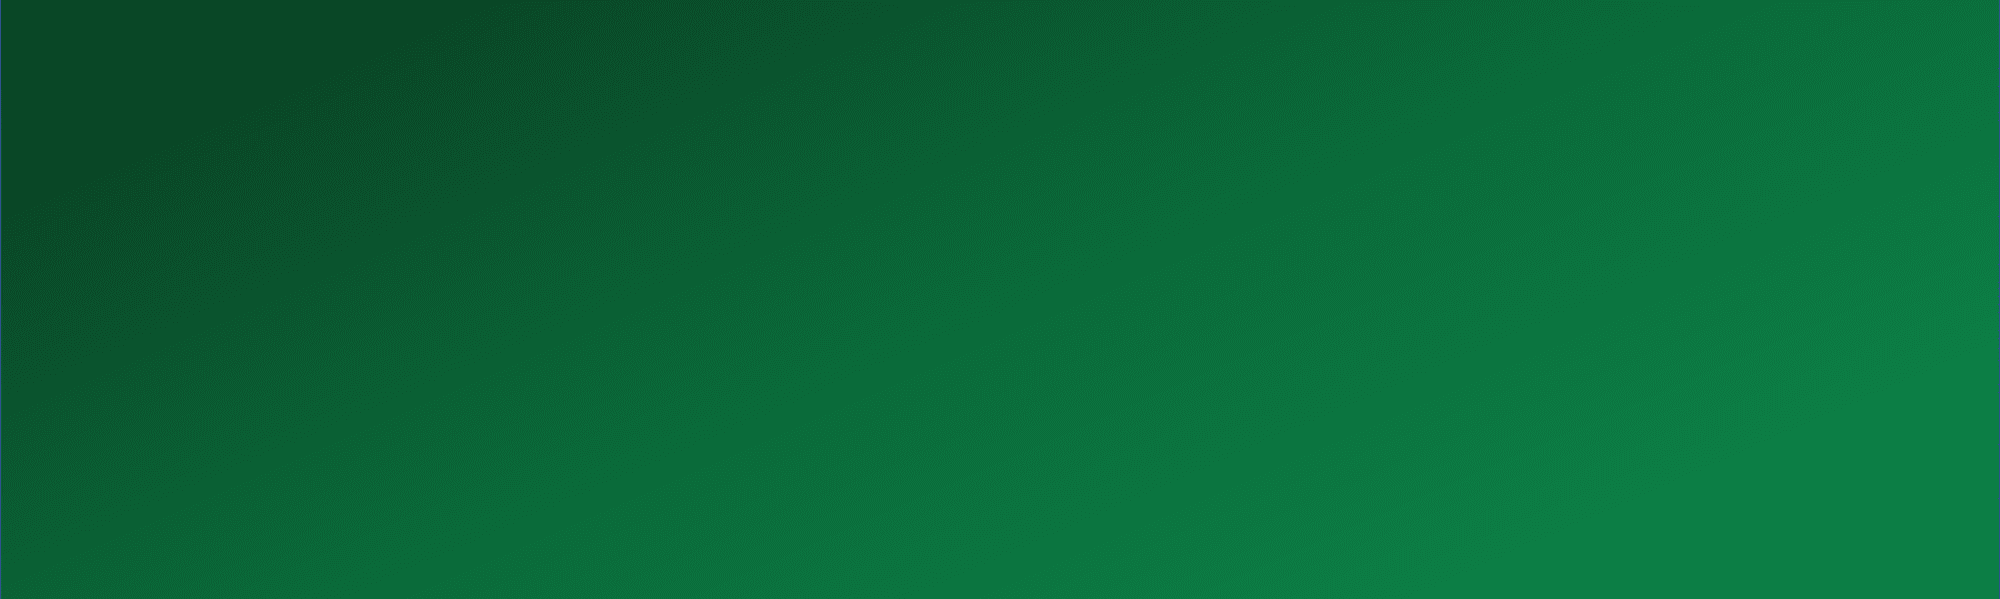 Green background with slight gradient